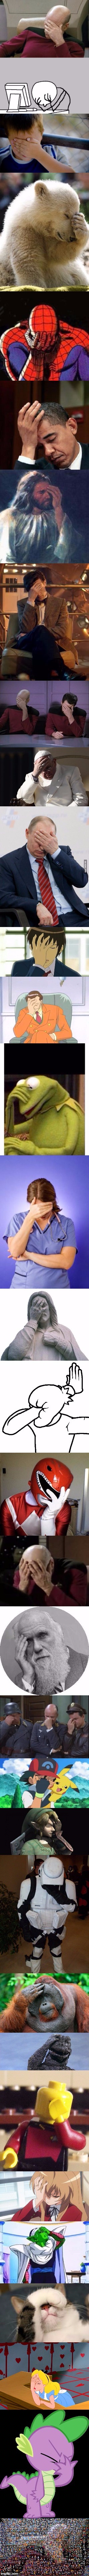 Well This Is The Greatest Meme Template I Have Made So Far... | . | image tagged in the epic facepalm,facepalm,darwin facepalm,ash facepalm,jesus facepalm,computer guy facepalm | made w/ Imgflip meme maker